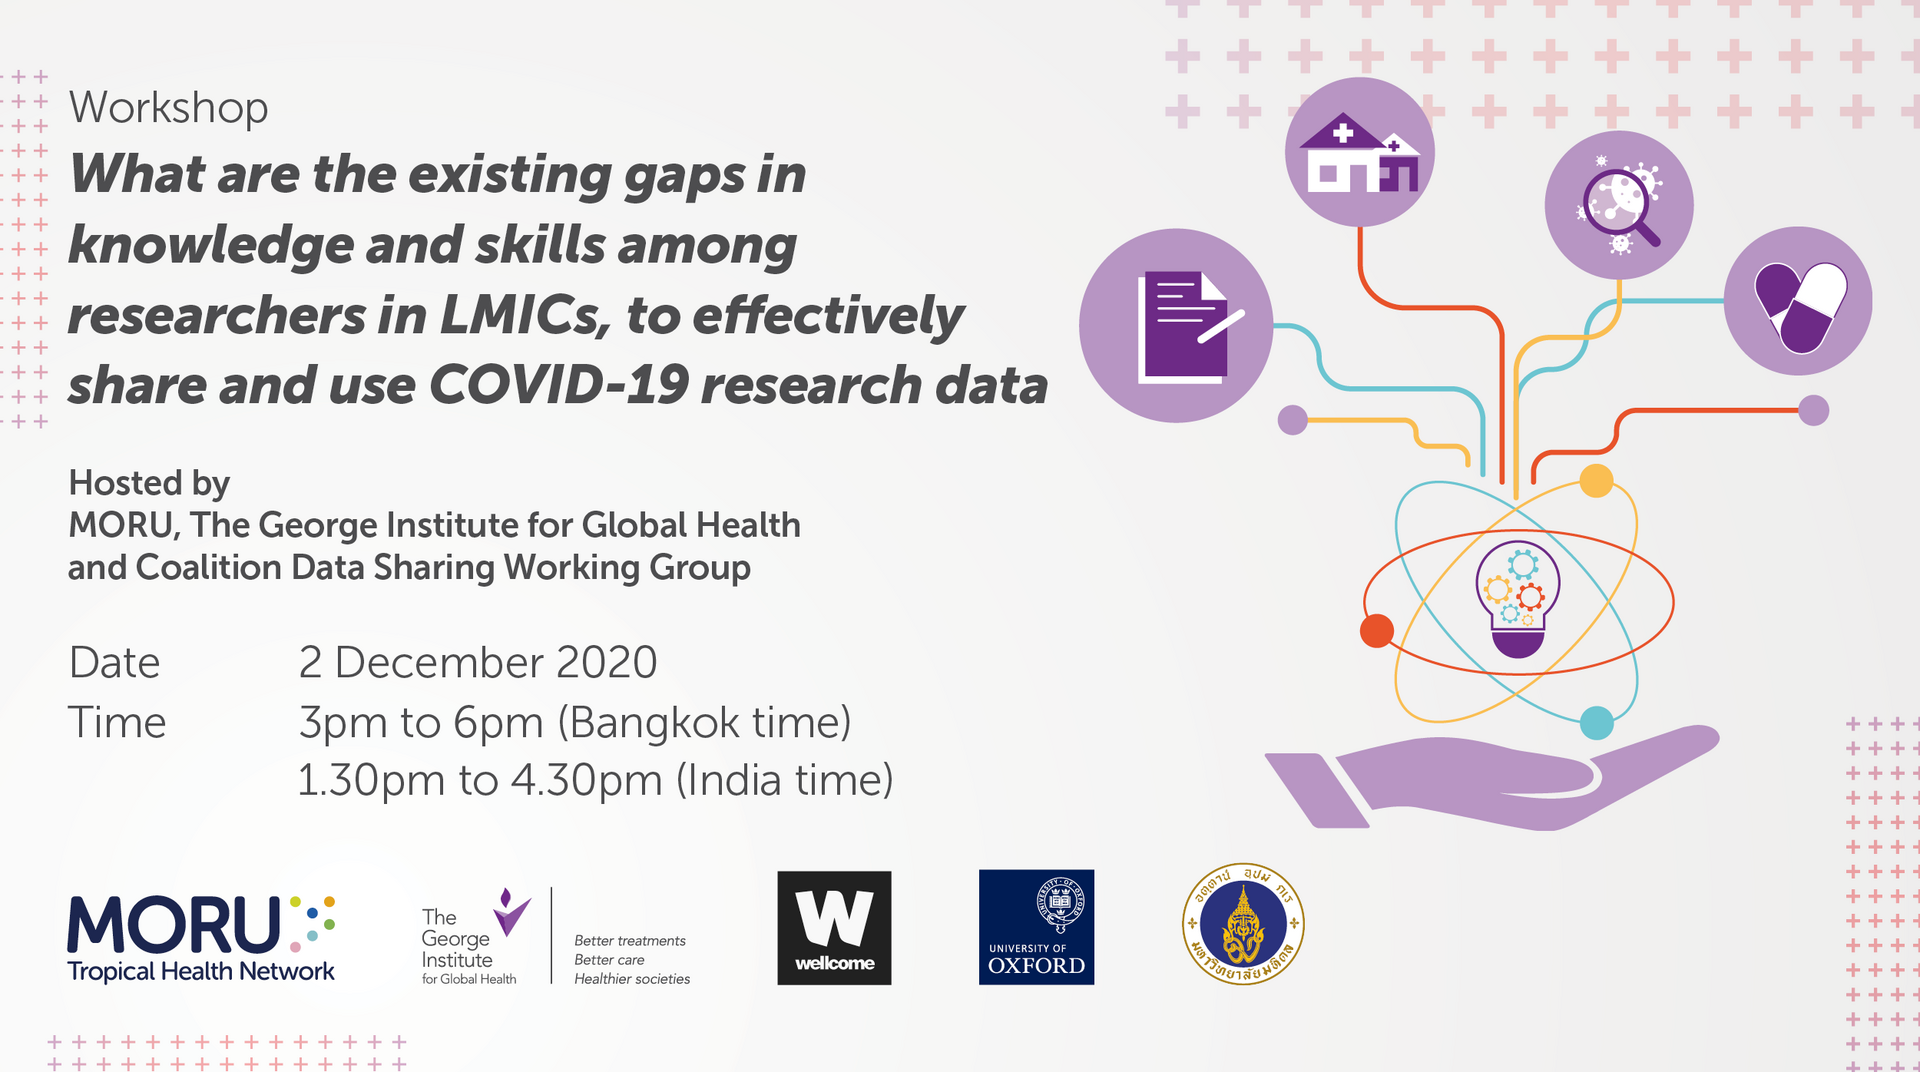 effectively share and use COVID-19 research data